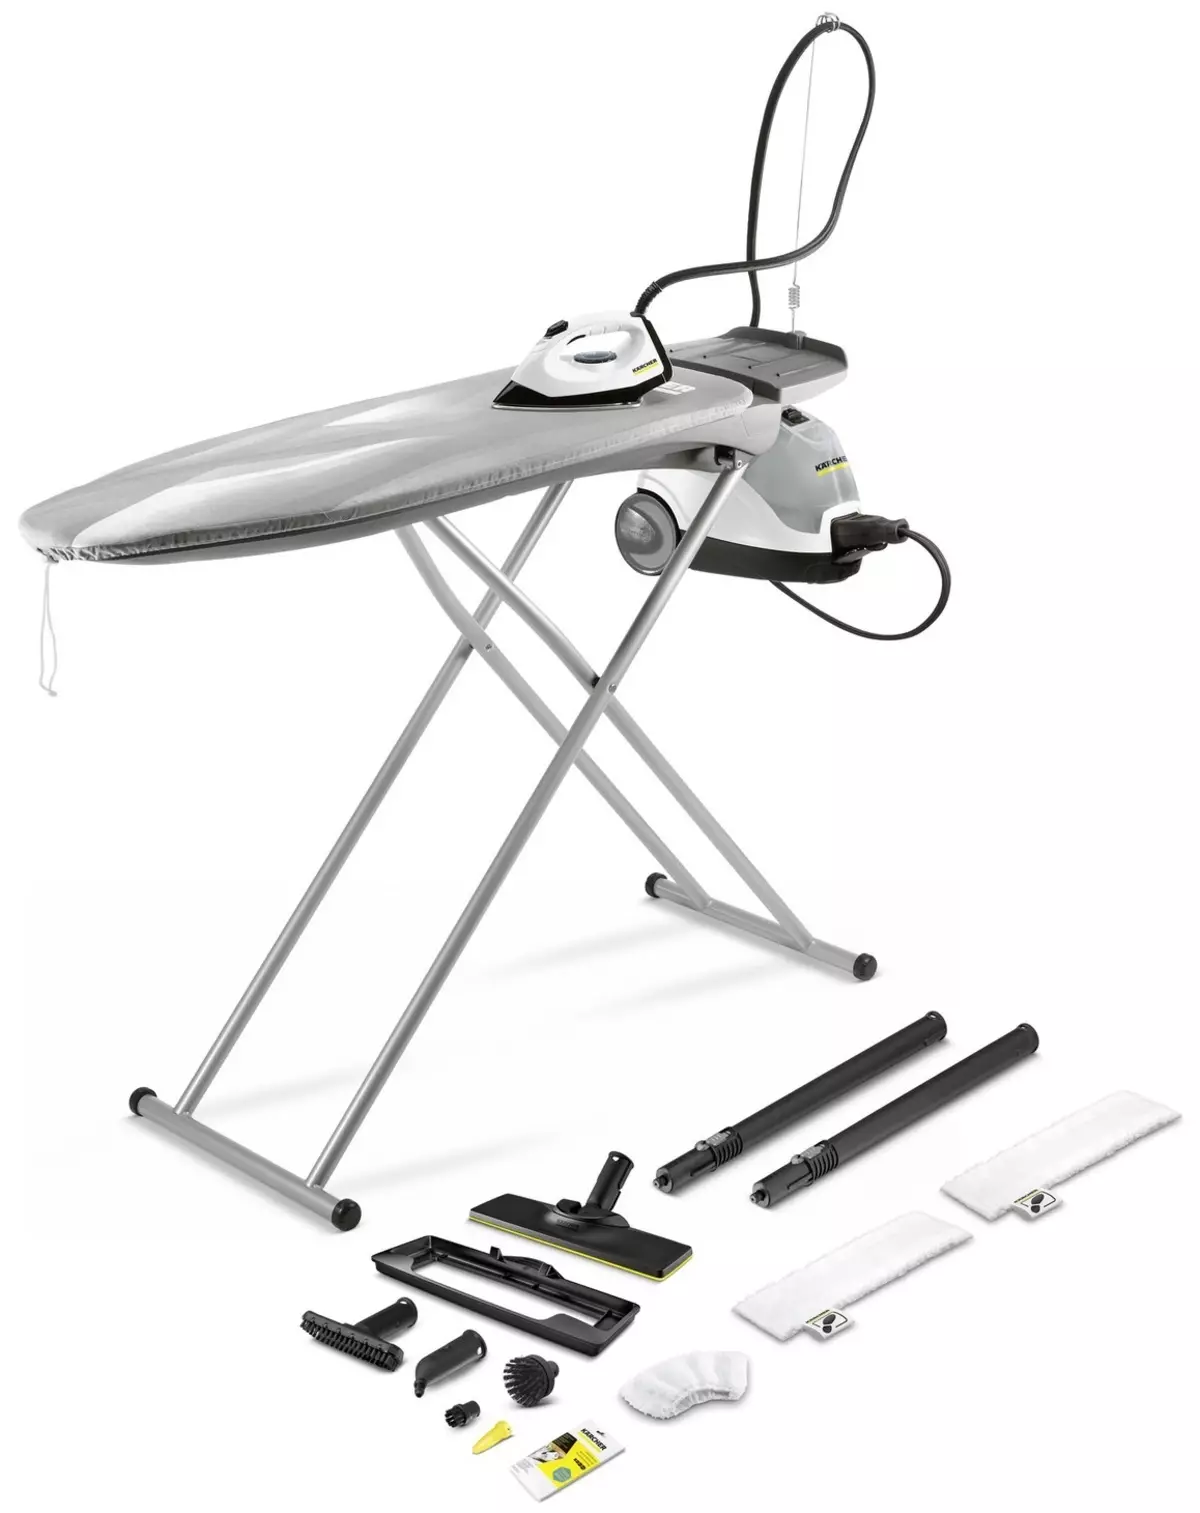 Ironing board for steam generator: rating of the best products, active board with stand for iron. How to choose? Reviews 11197_13